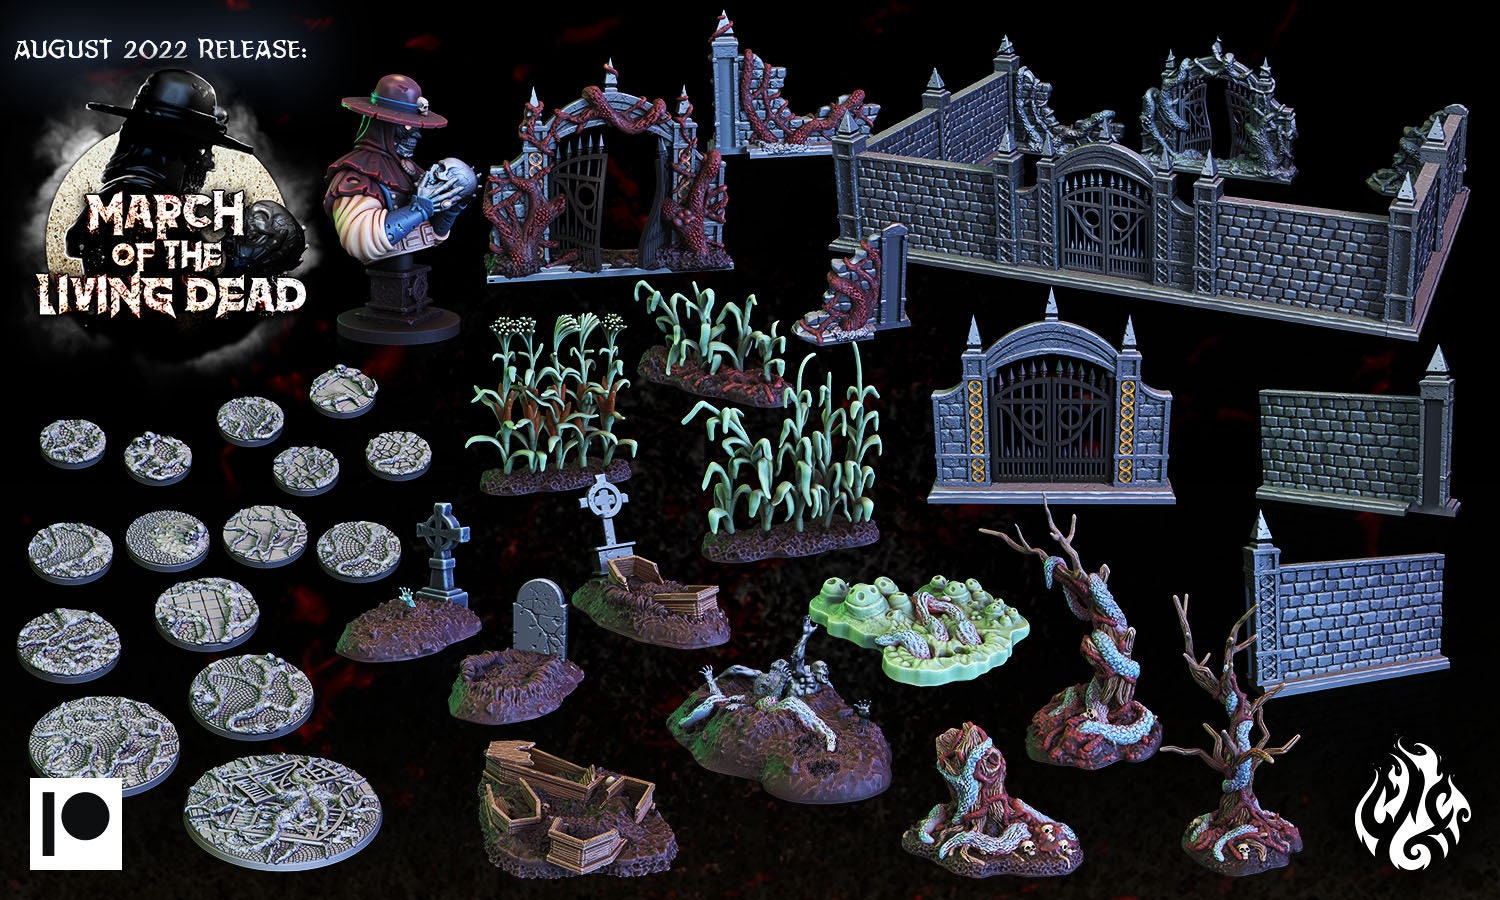 Cemetary Walls - Crippled God Foundry - March of the Living Dead 